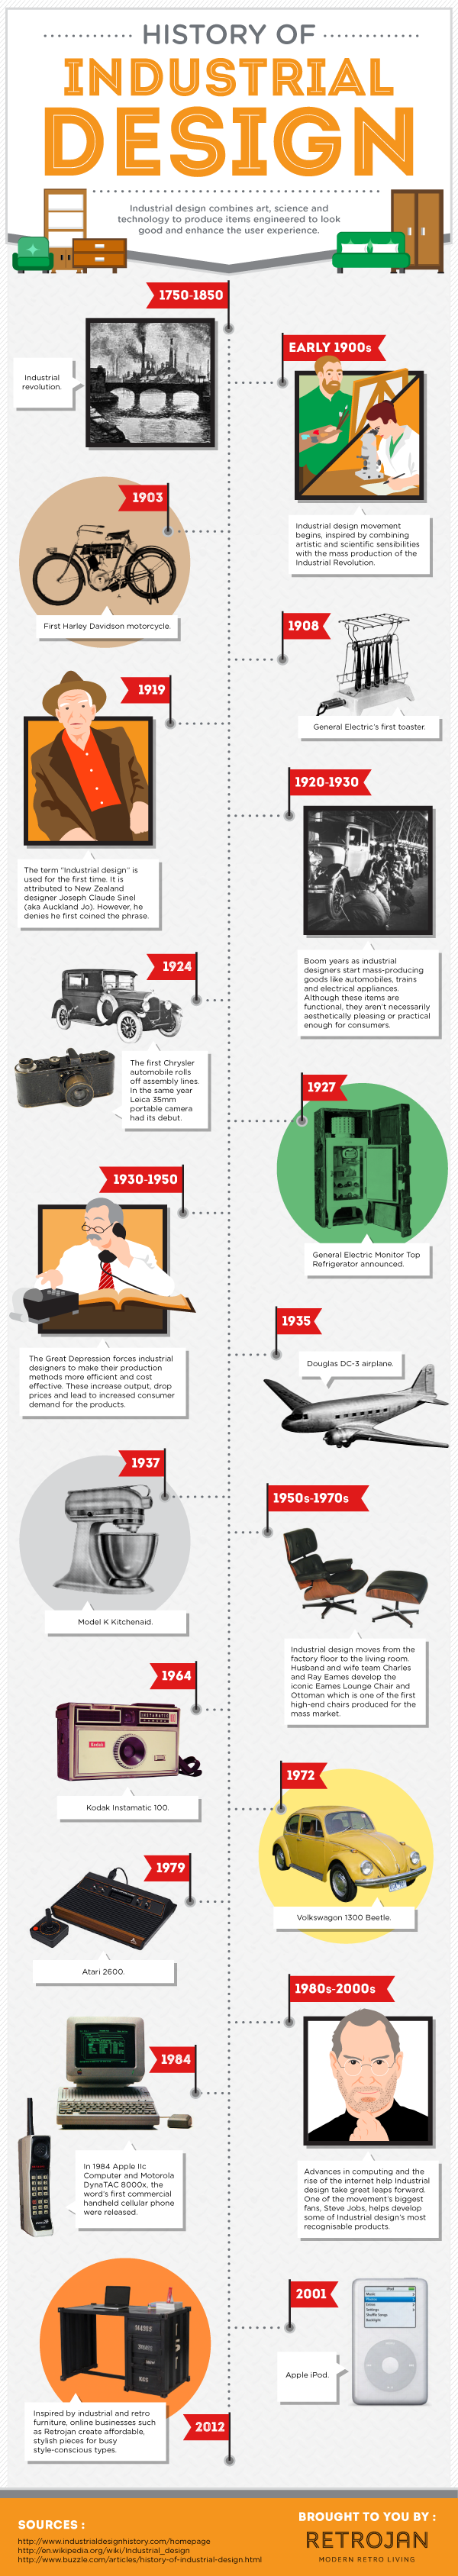 History of industrial design